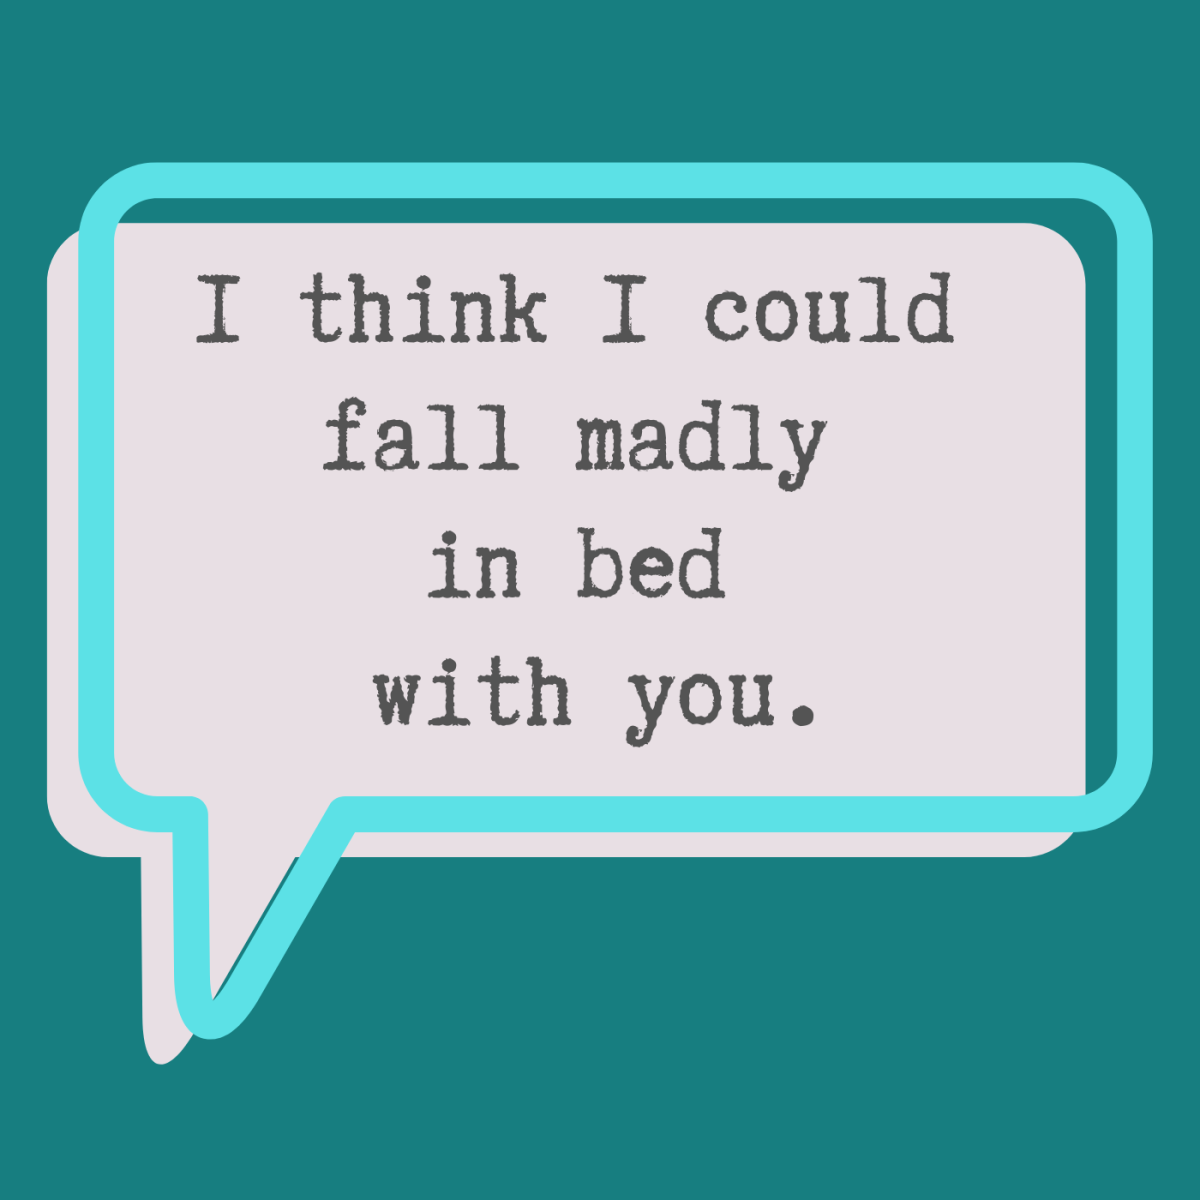 164+ CUTEST Flirty Quotes: Text to Make Your Crush Crazy